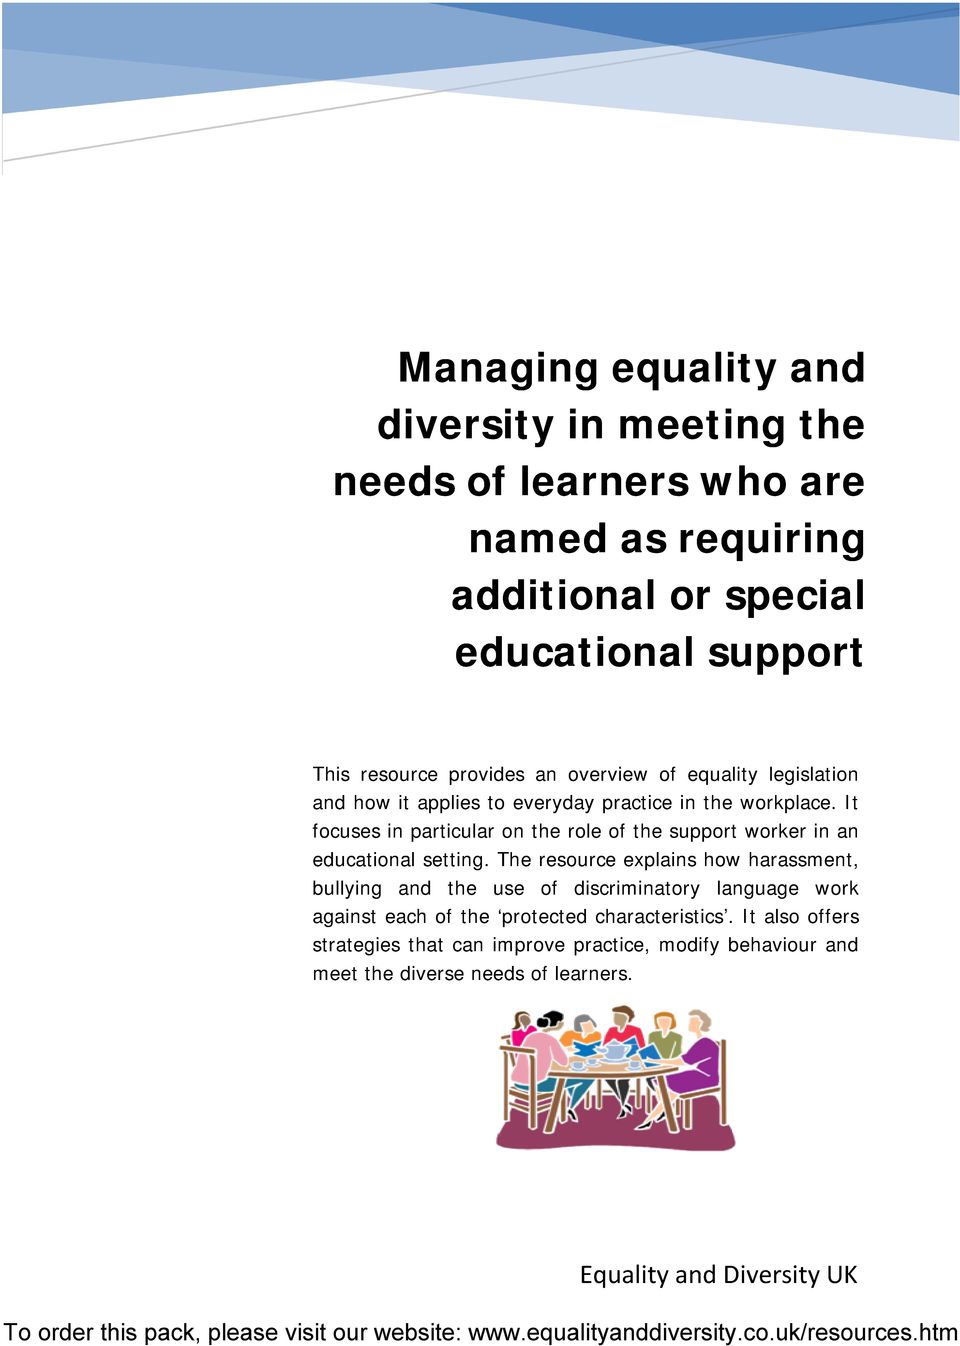 It focuses in particular on the role of the support worker in an educational setting.